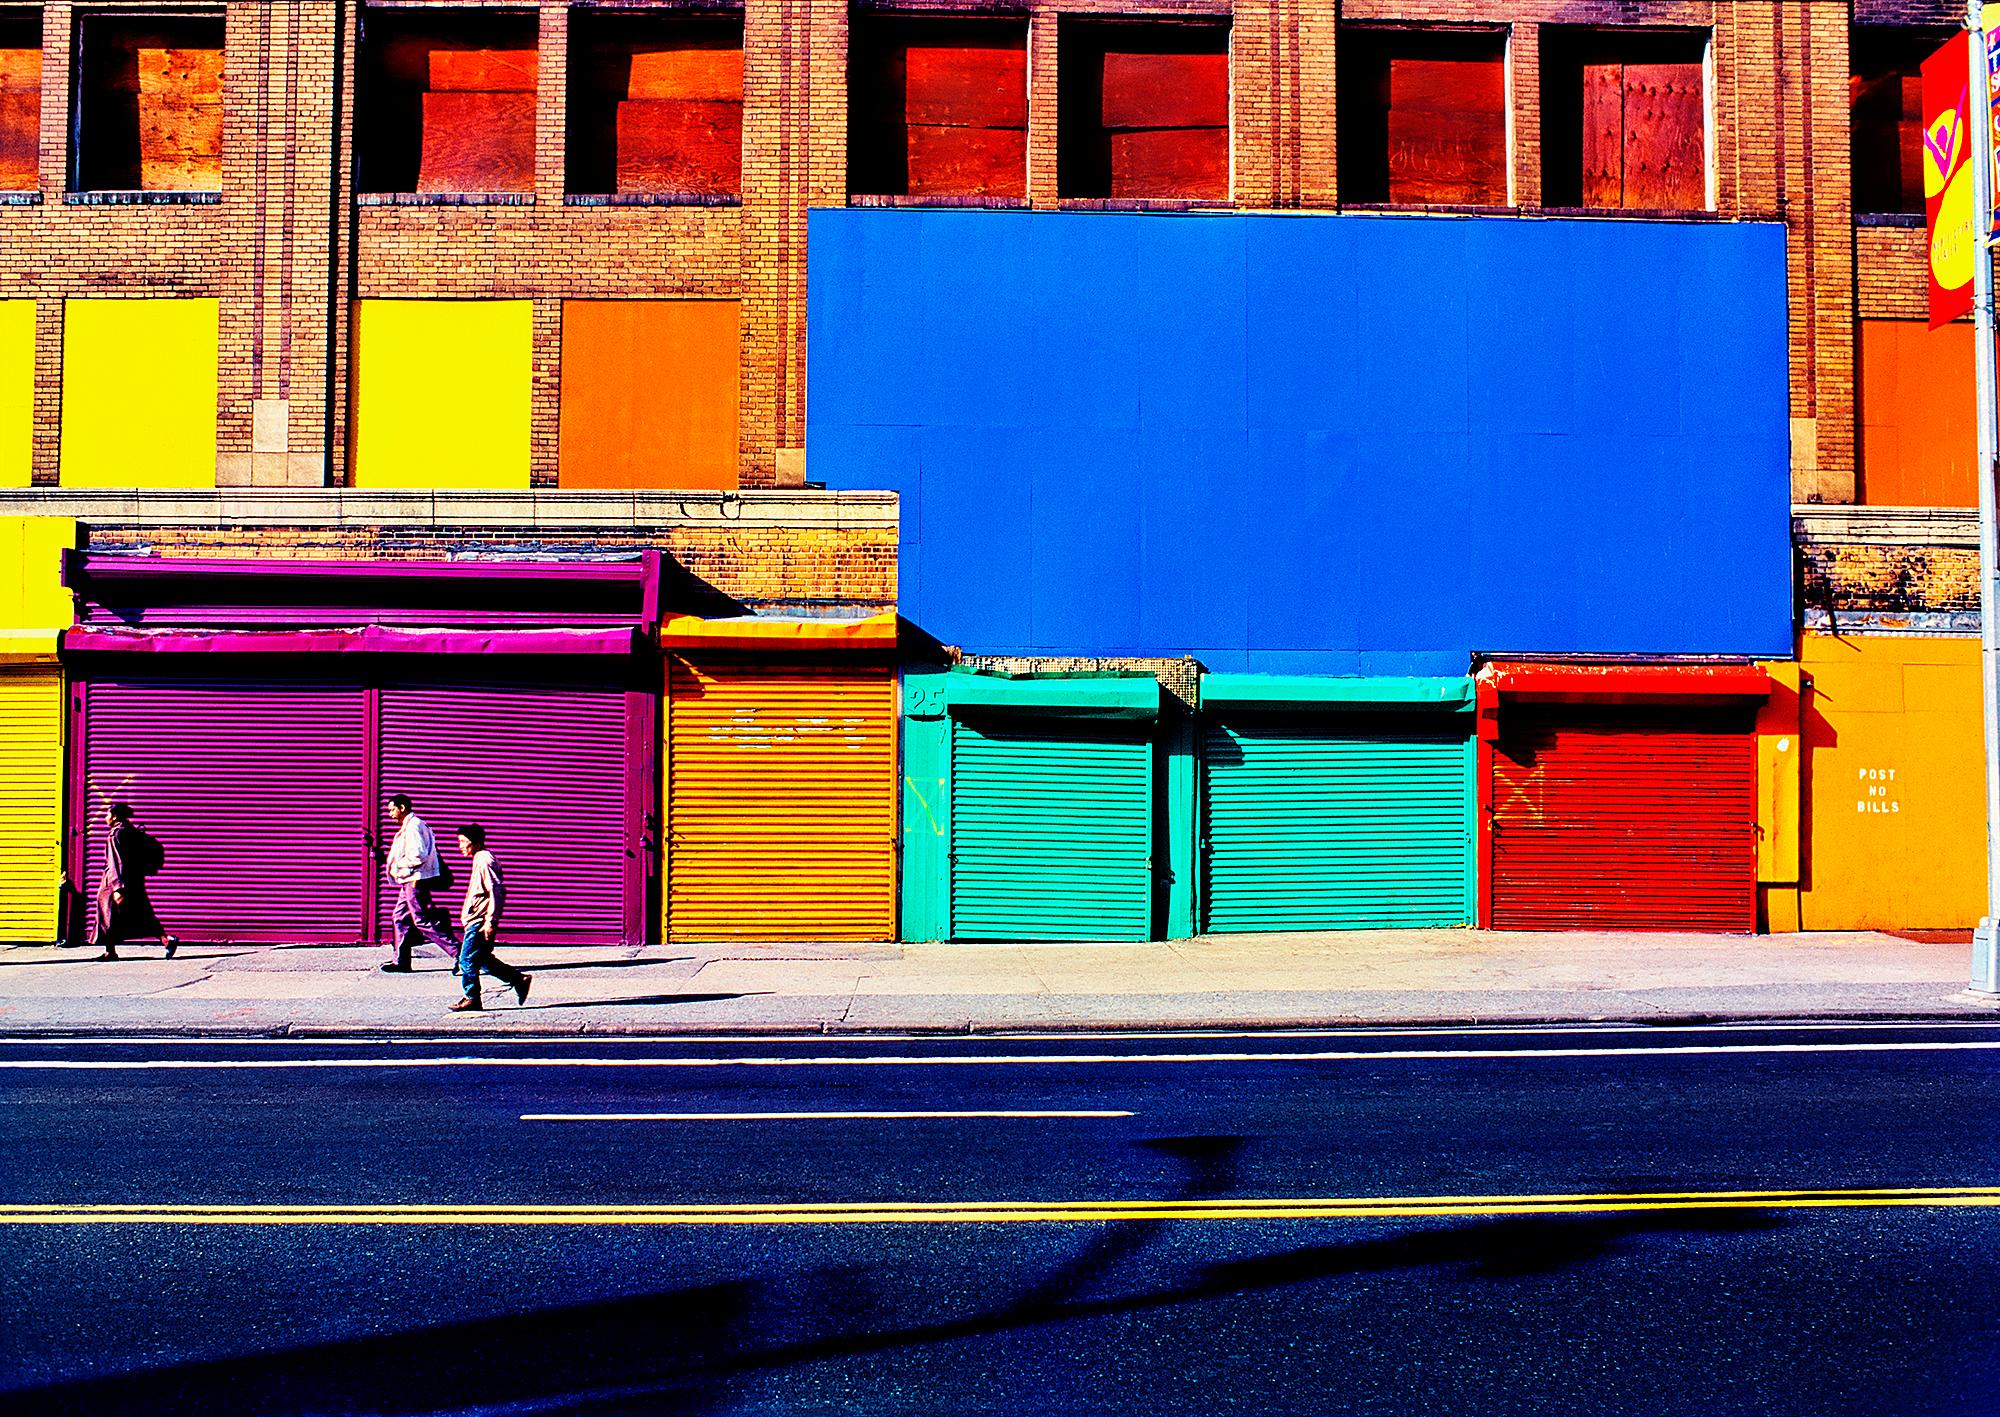 Mitchell Funk Color Photograph - Colorful New York City Facade with Blue, Yellow and Red Squares like Mondrian